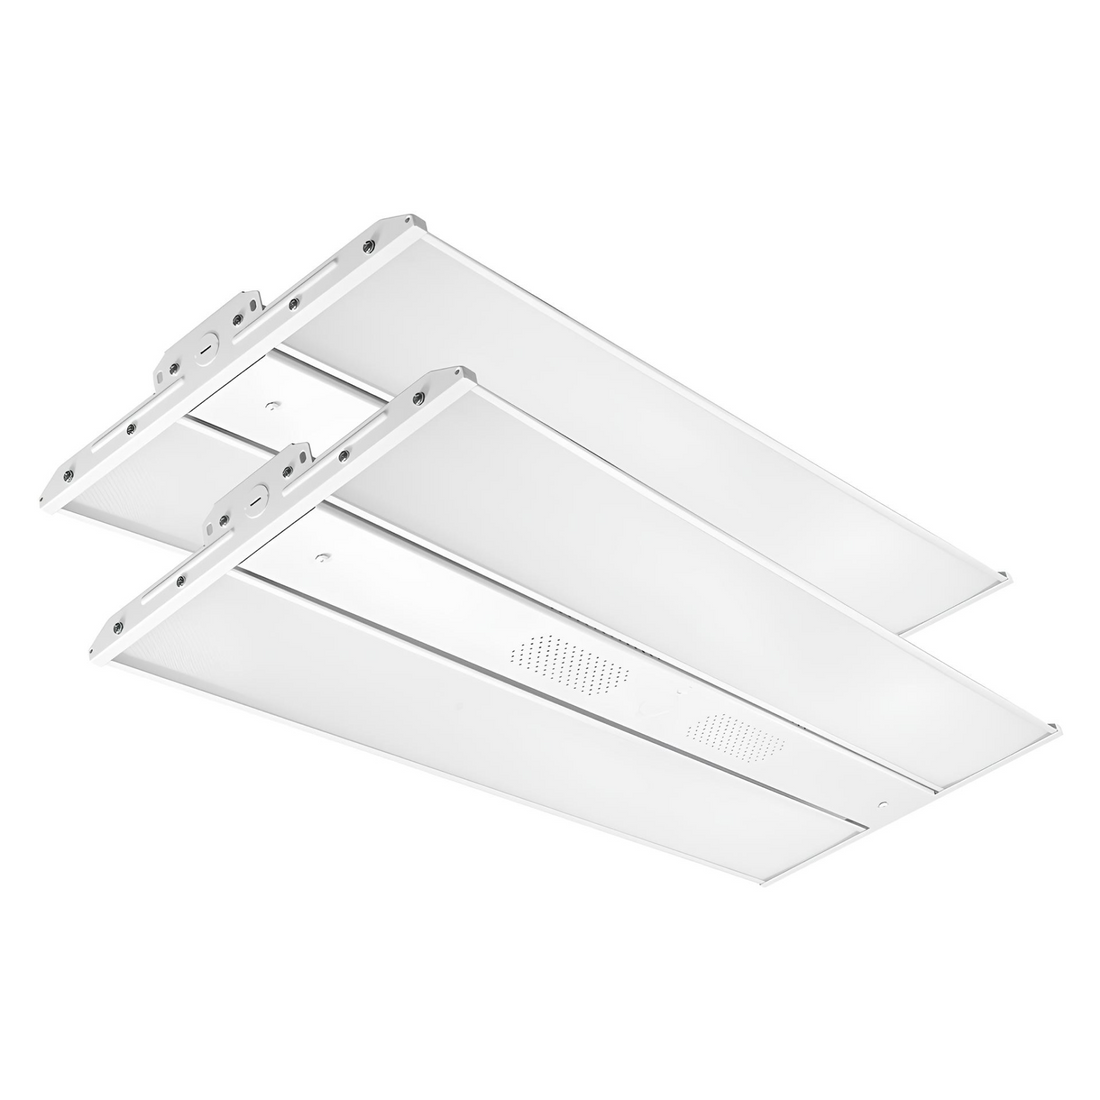 LED Linear High Bay Light - 225W - 5000K- 120-277VAC - 31500 Lumens - 0-10V Dimmable - UL Listed - DLC Premium Listed - 5 Years Warranty - 2-Pack